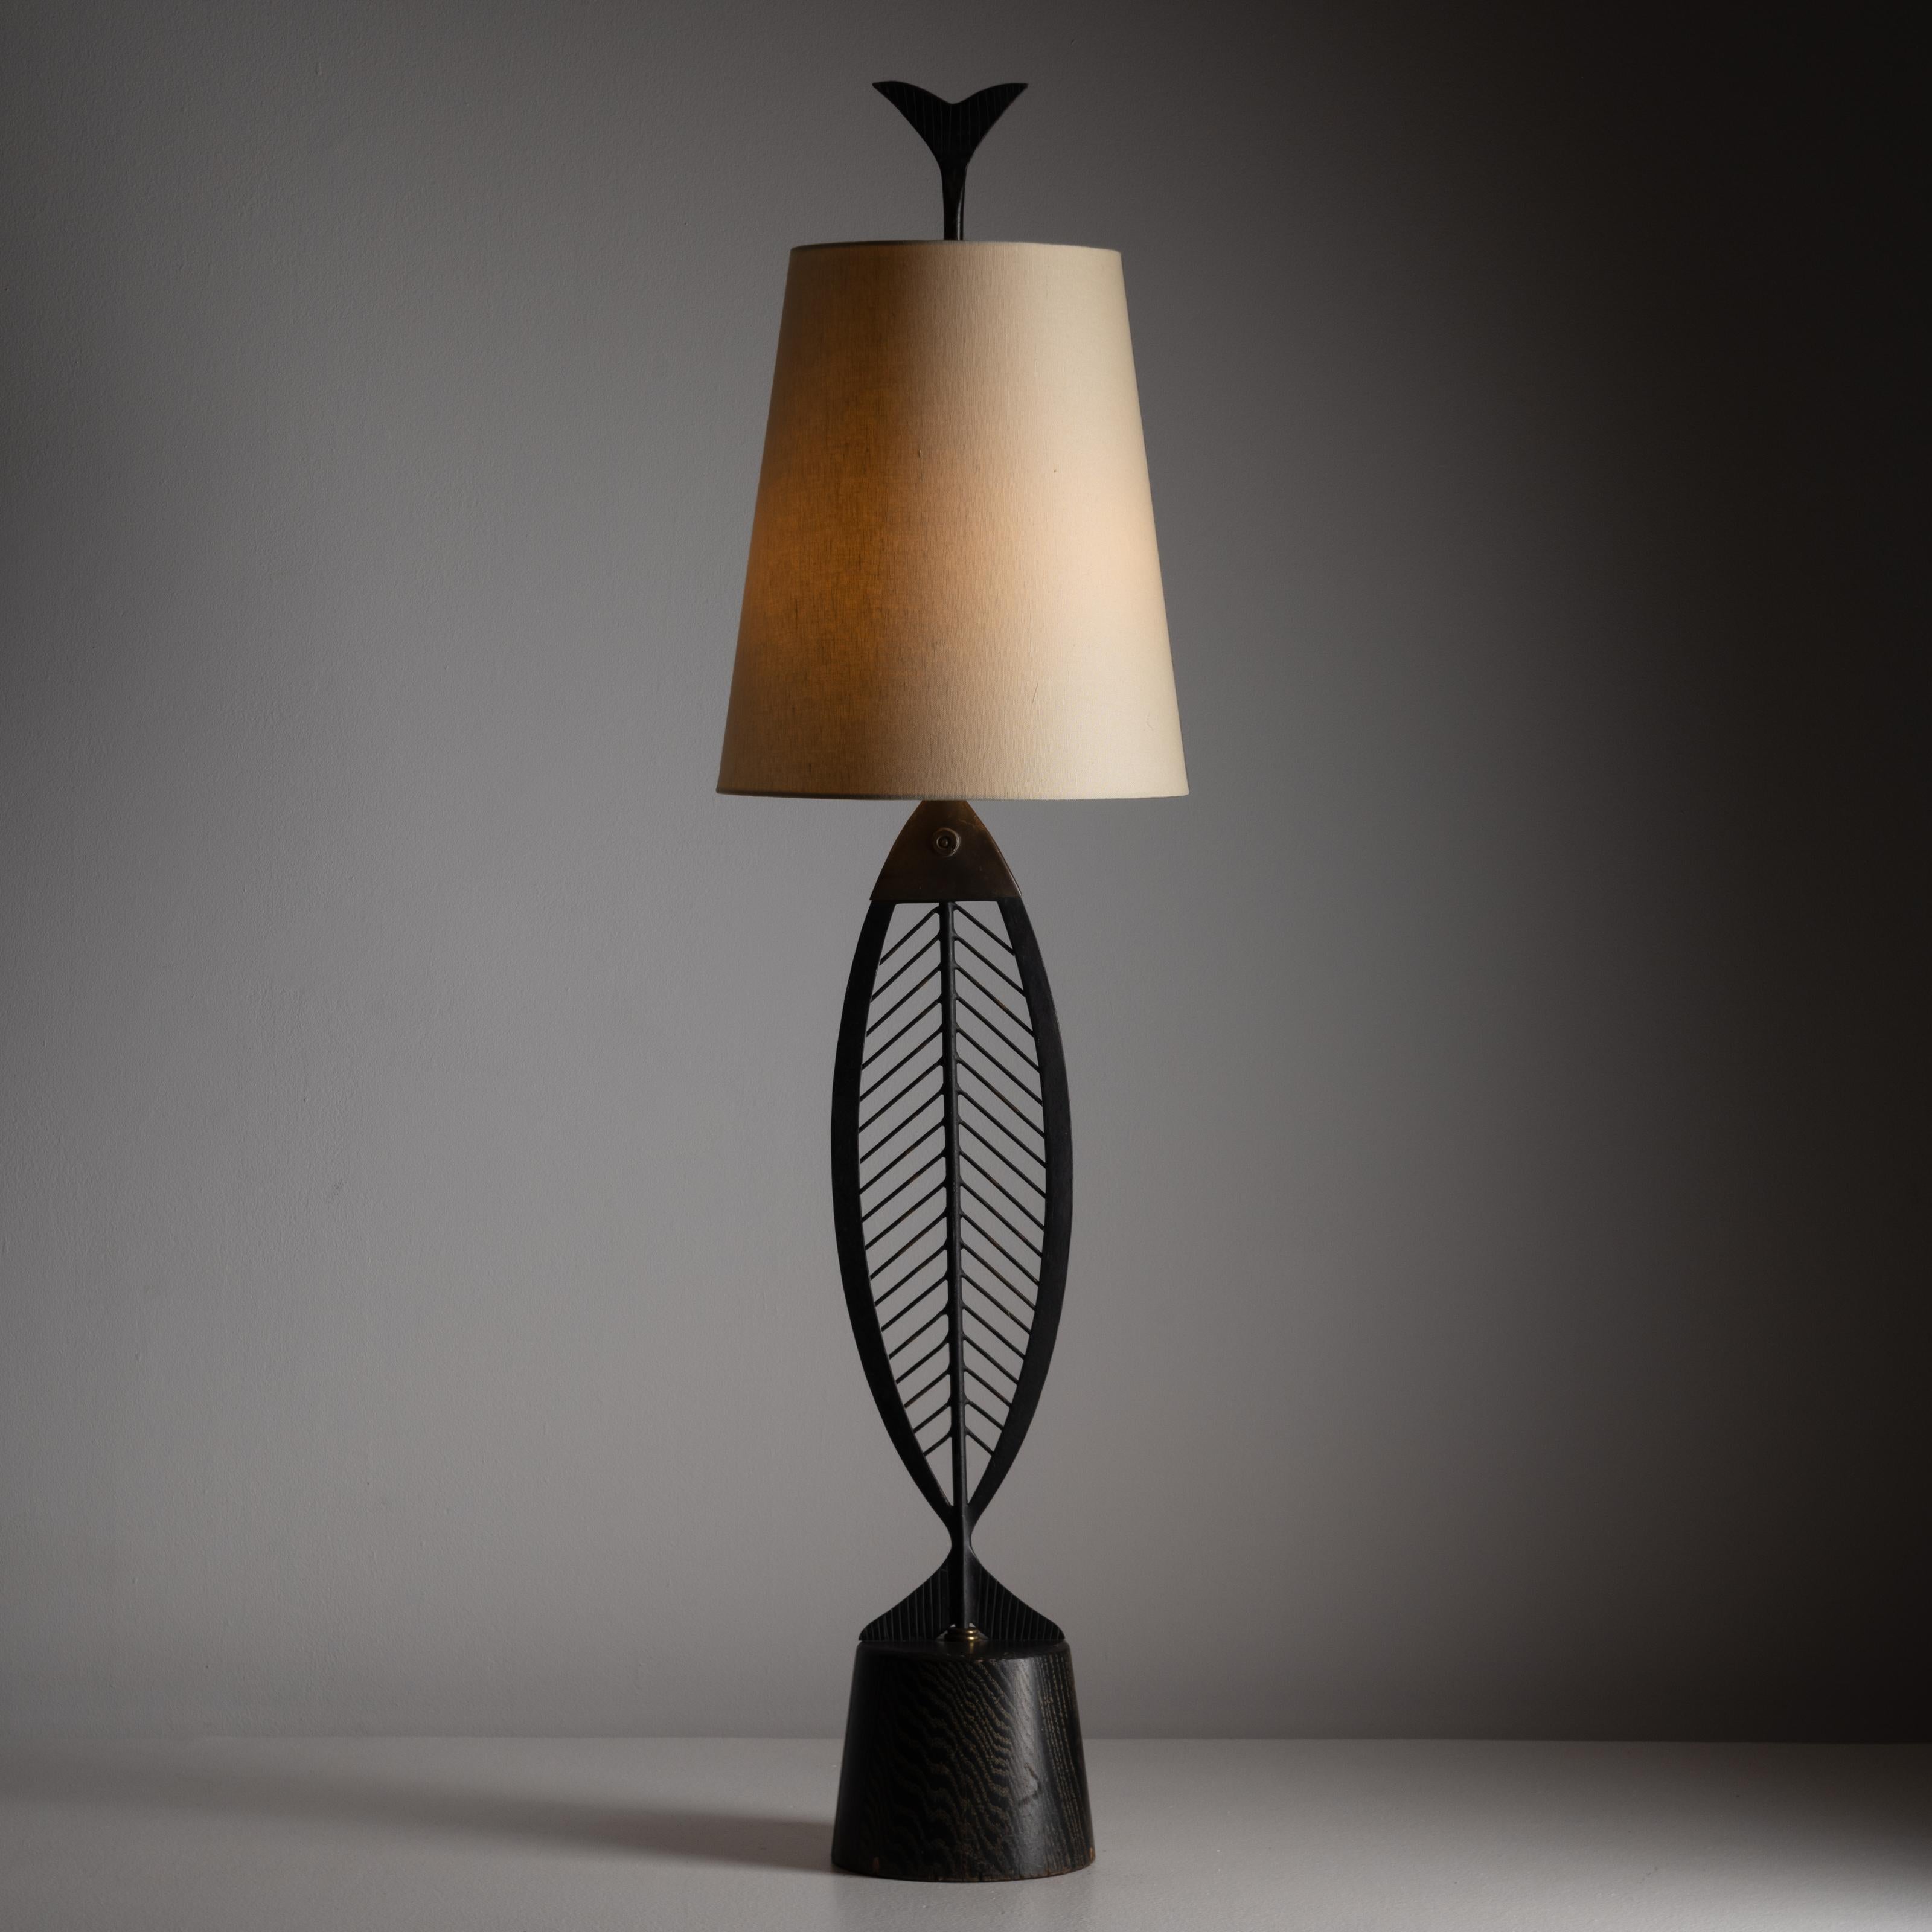 Monumental table lamp attributed to Heifetz. Manufactured and designed in the US somewhere within the mid-twentieth century. Iron, brass, cerused oak, and linen make up this large table lamp. Requires a single E26 socket type. We recommend one 75w